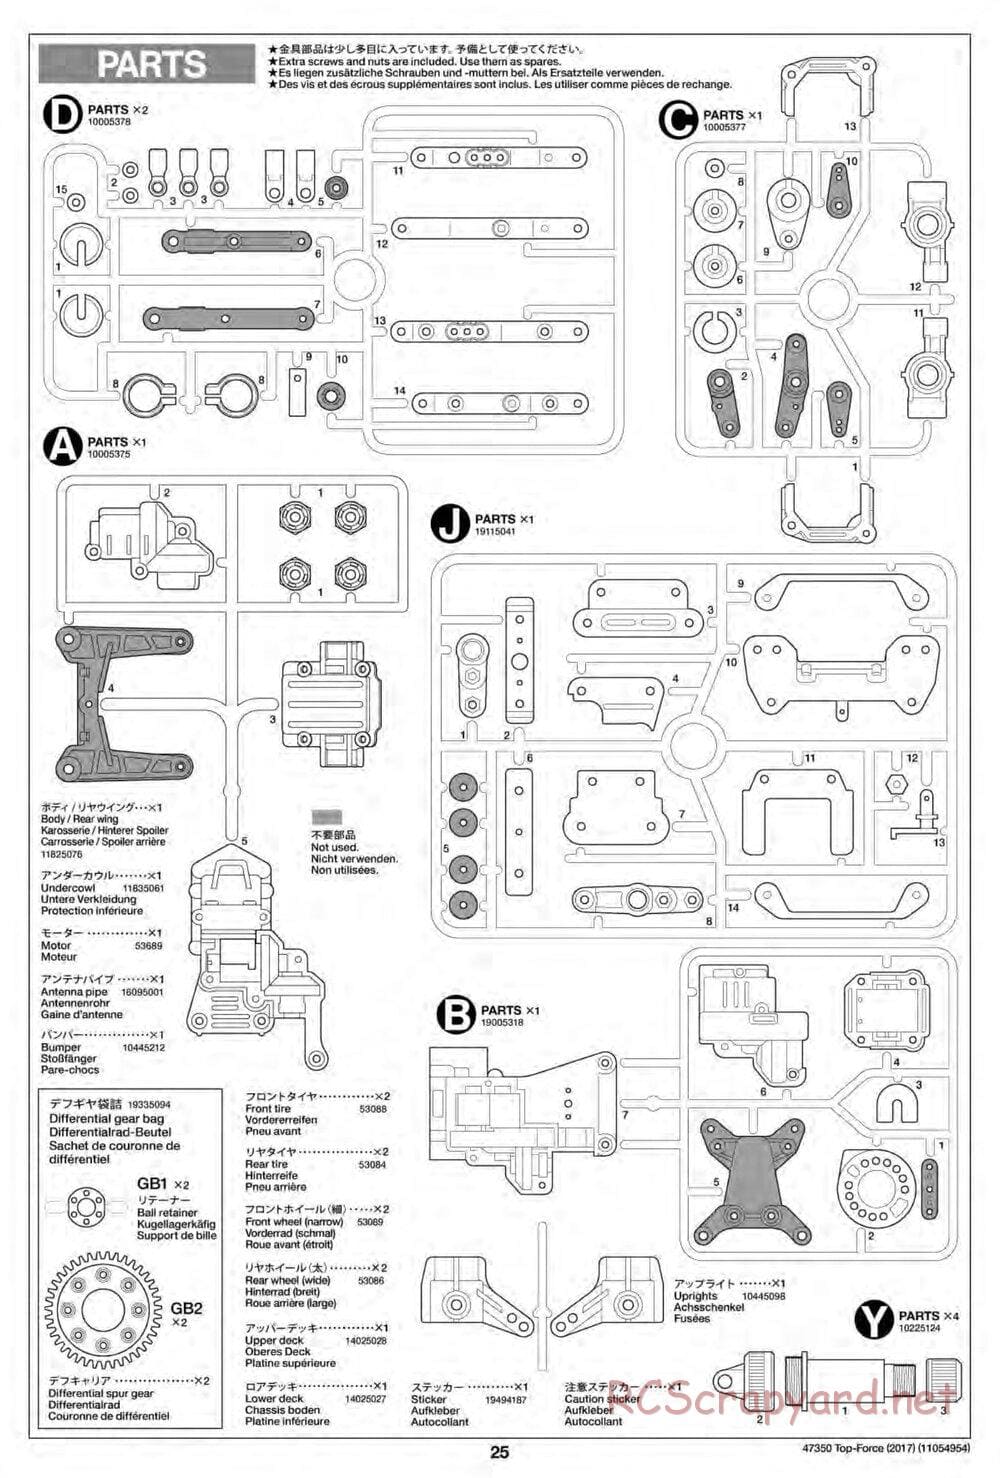 Tamiya - Top Force 2017 - DF-01 Chassis - Manual - Page 25